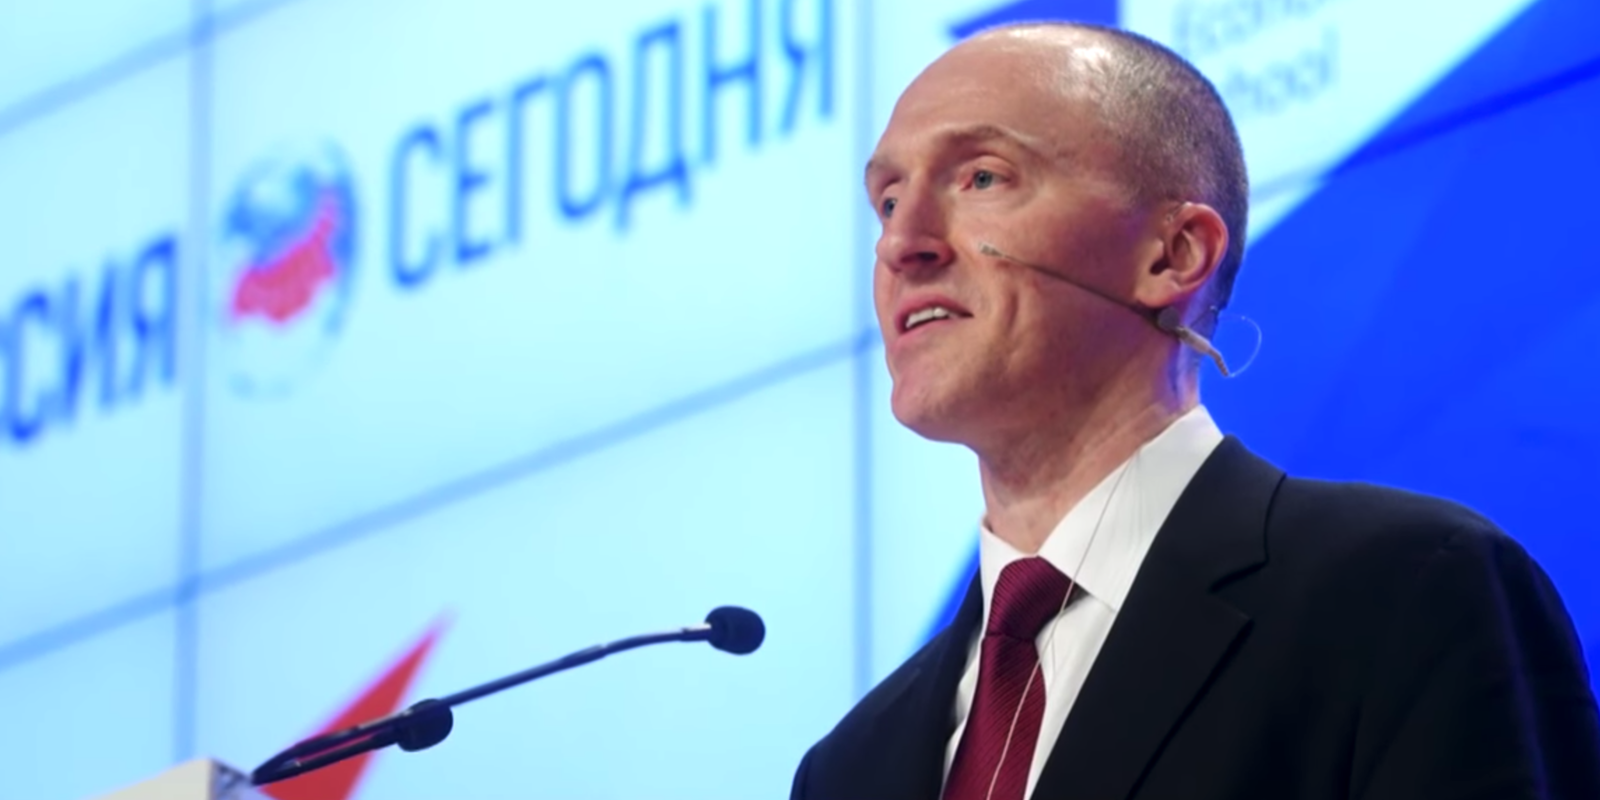 Former Trump campaign advisor Carter Page giving a speech in Moscow.